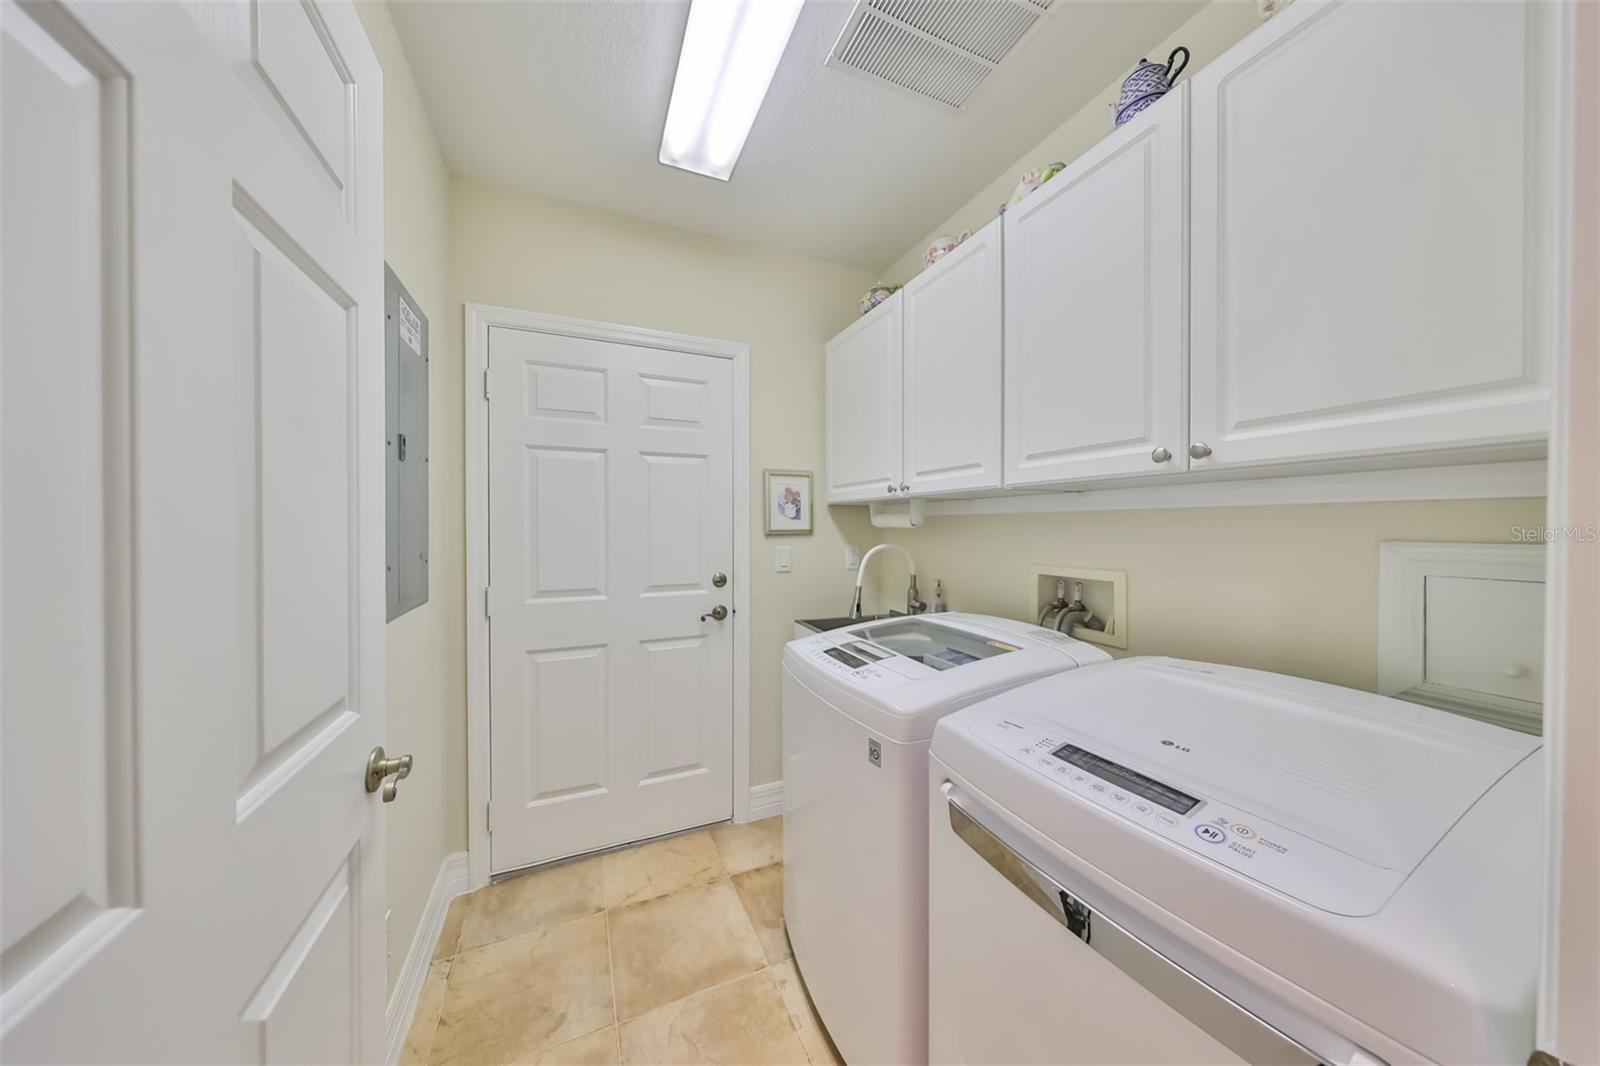 Separate indoor laundry room with washer and dryer and cabinets for storage. There is also a utility sink for added convenience.